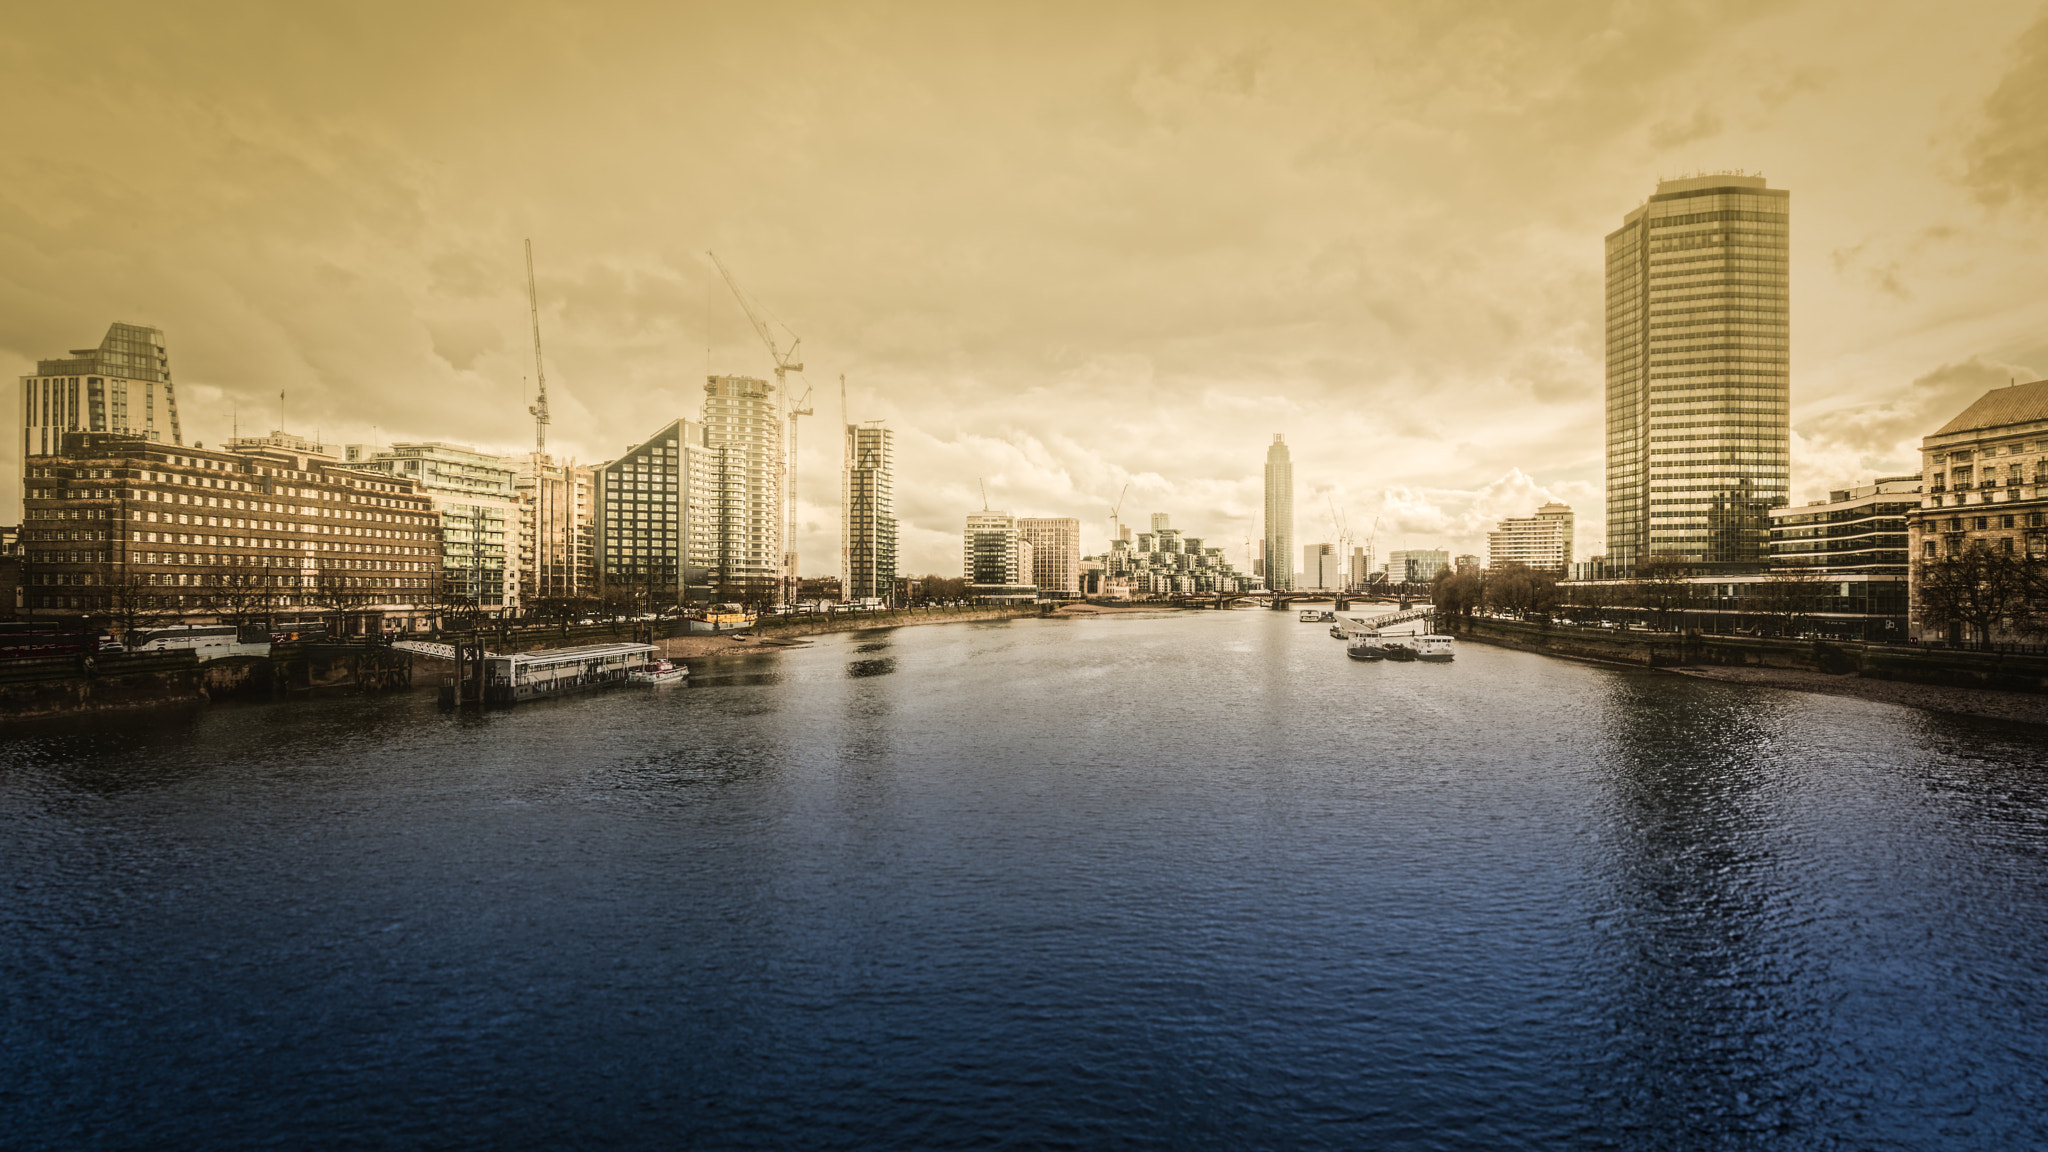 Sony a7R II sample photo. The view of the thames from lambeth bridge looking towards vauxhall bridge, london photography